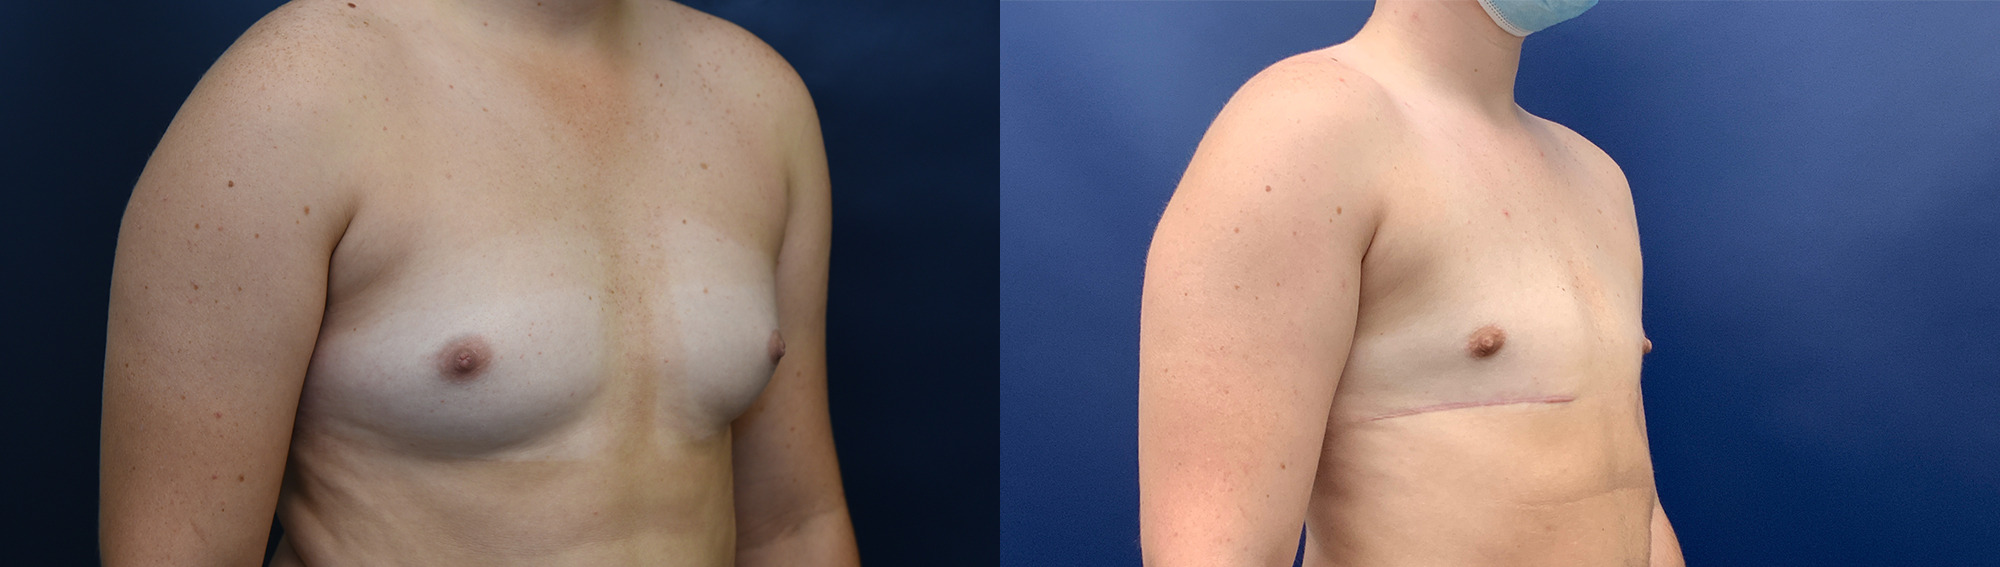 Female to Male Top Surgery by Dr. Butler Before and After Photo by Dr. Butler in Pensacola Florida